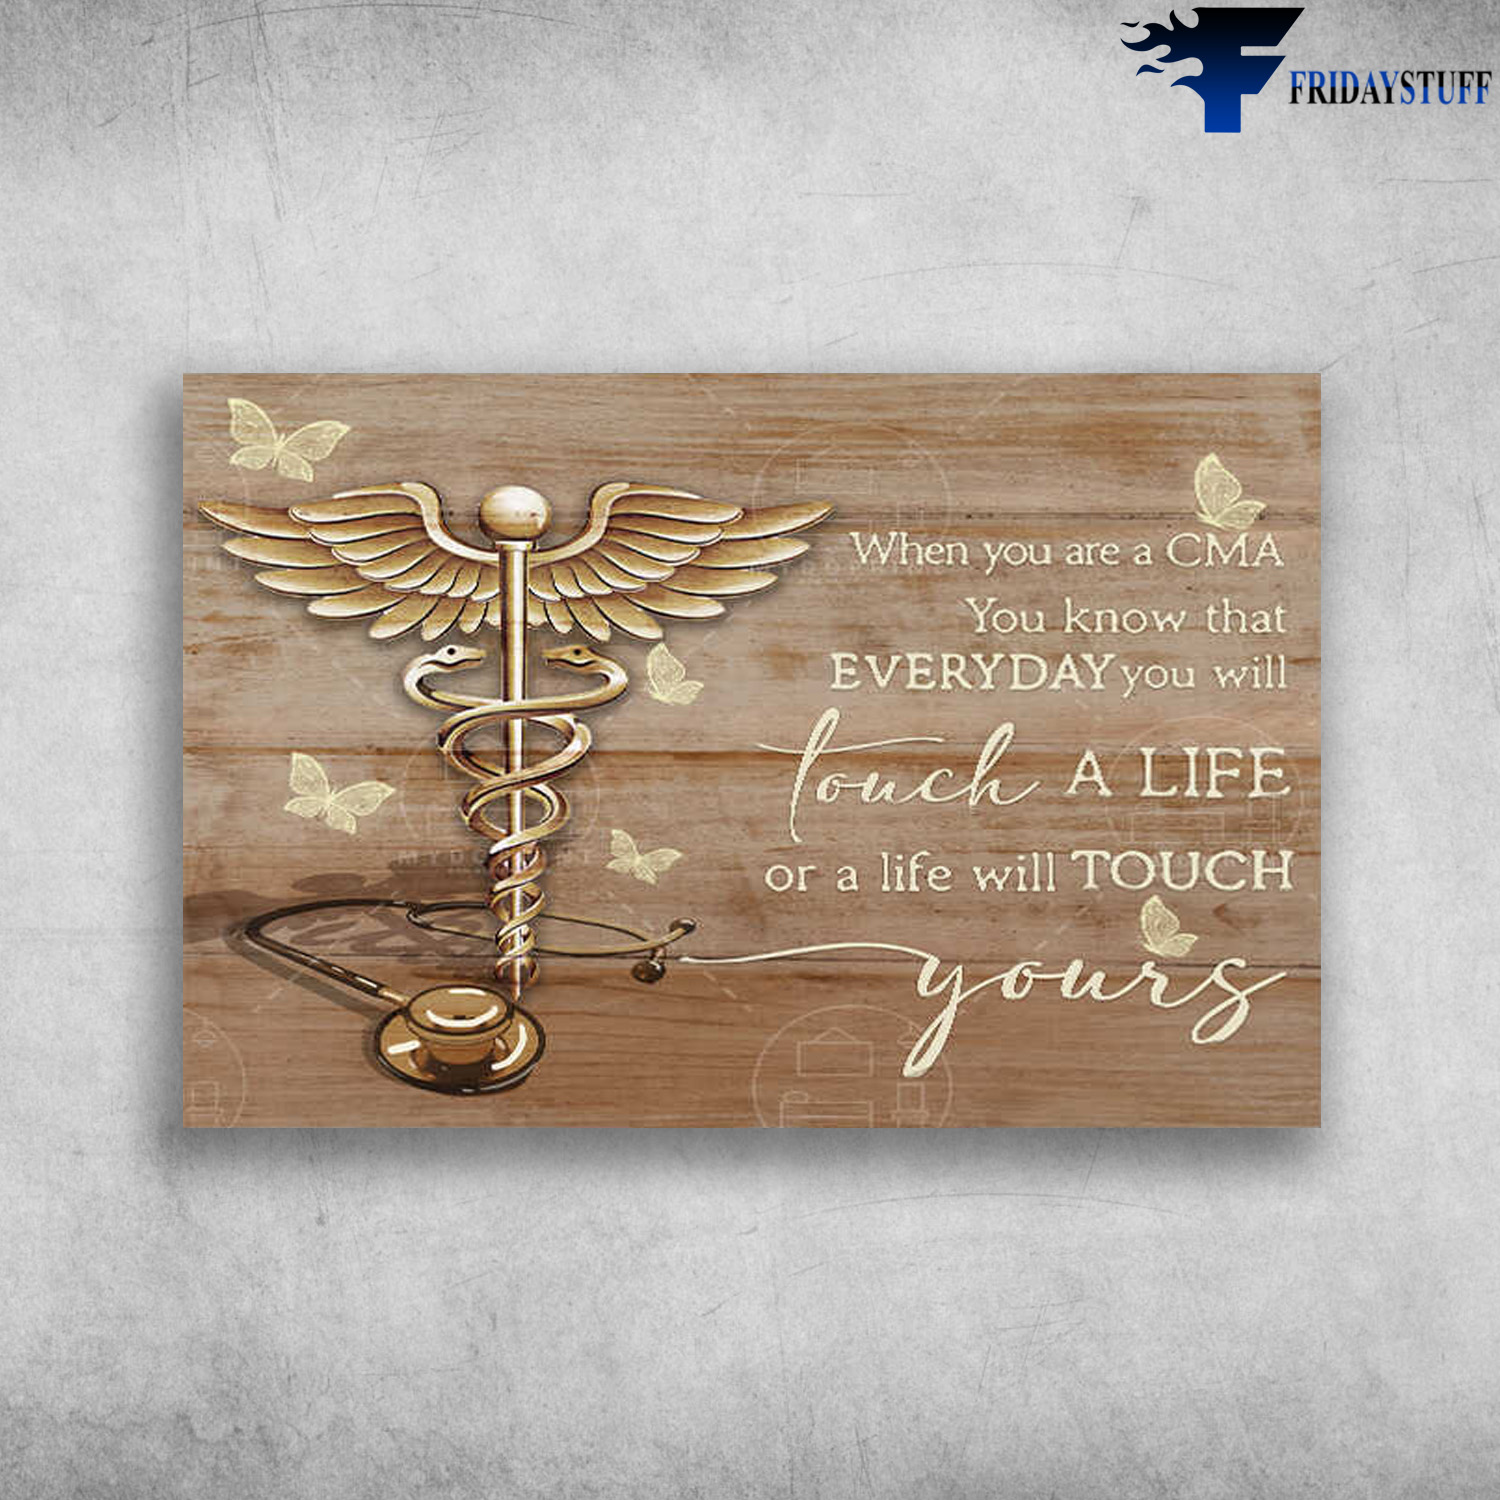 Stethoscope Caduceus - When You Are A CMA, You Know That Everyday You Will Touch A Life, Or A Life Will Touch Yours